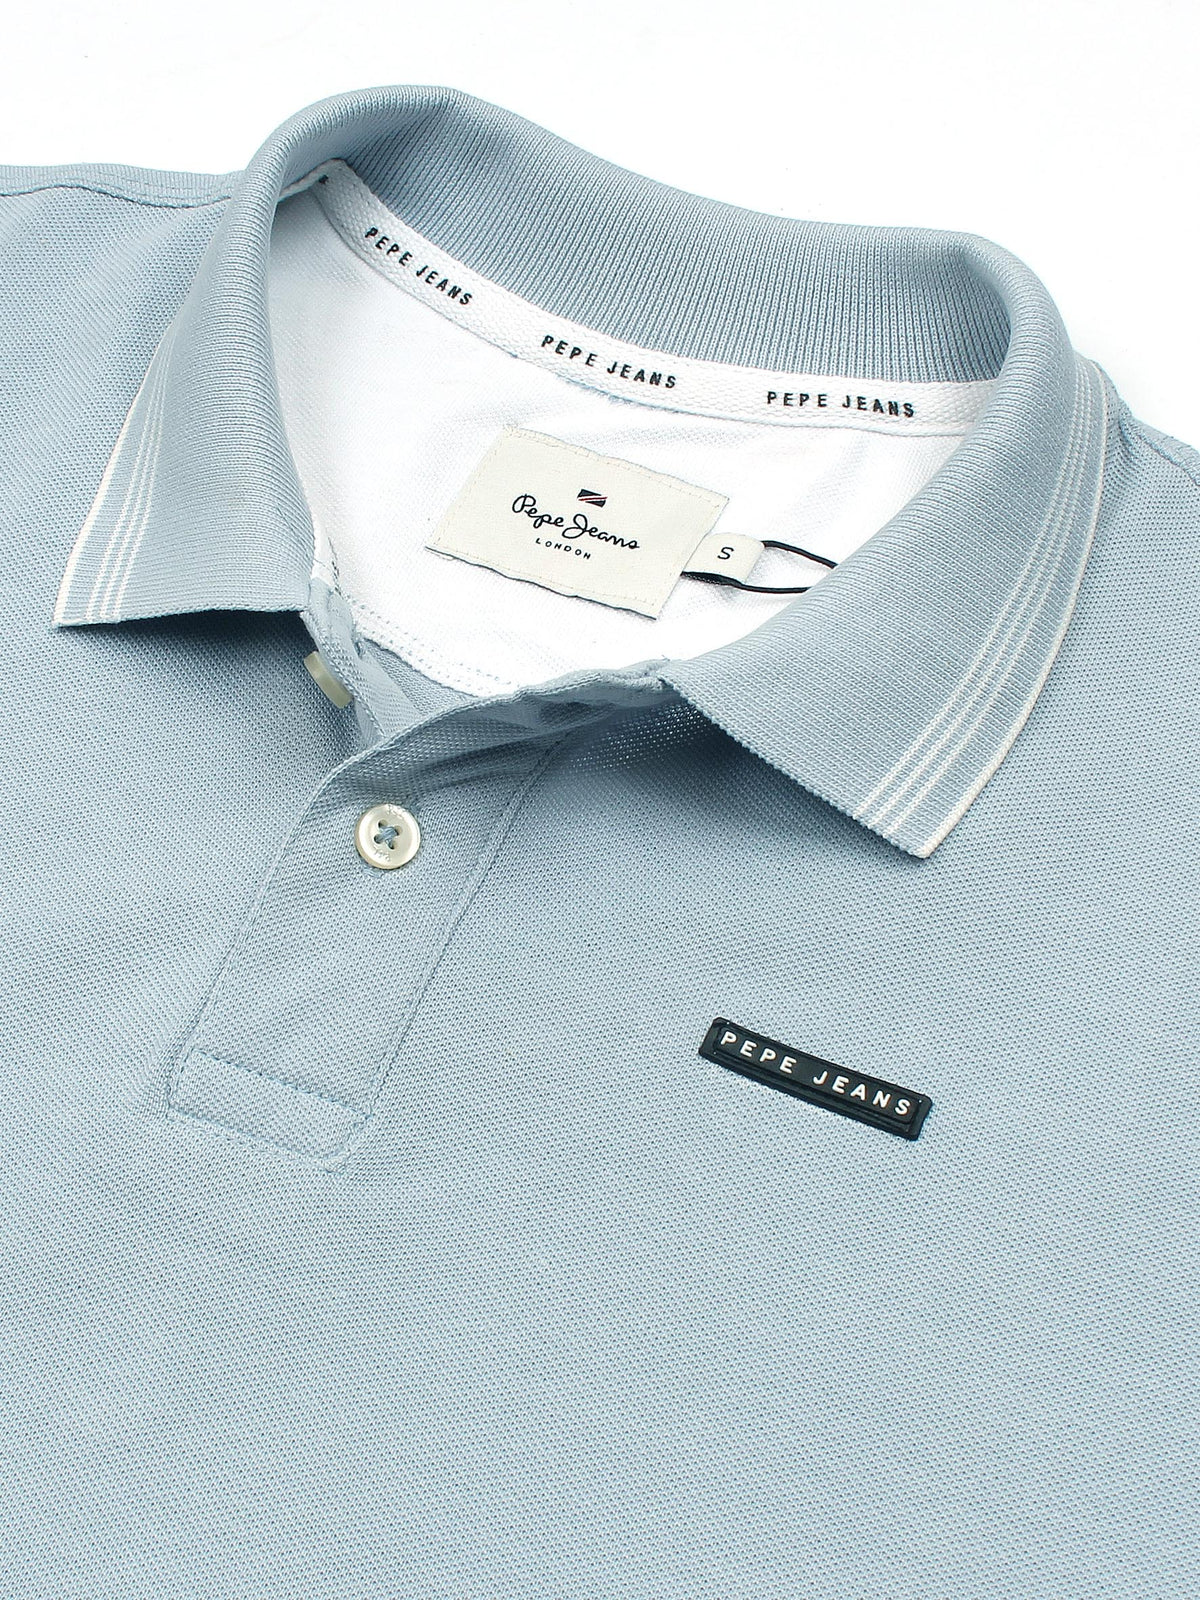 PP JEAN sky bd genuine exclusive polo shirt (00328)